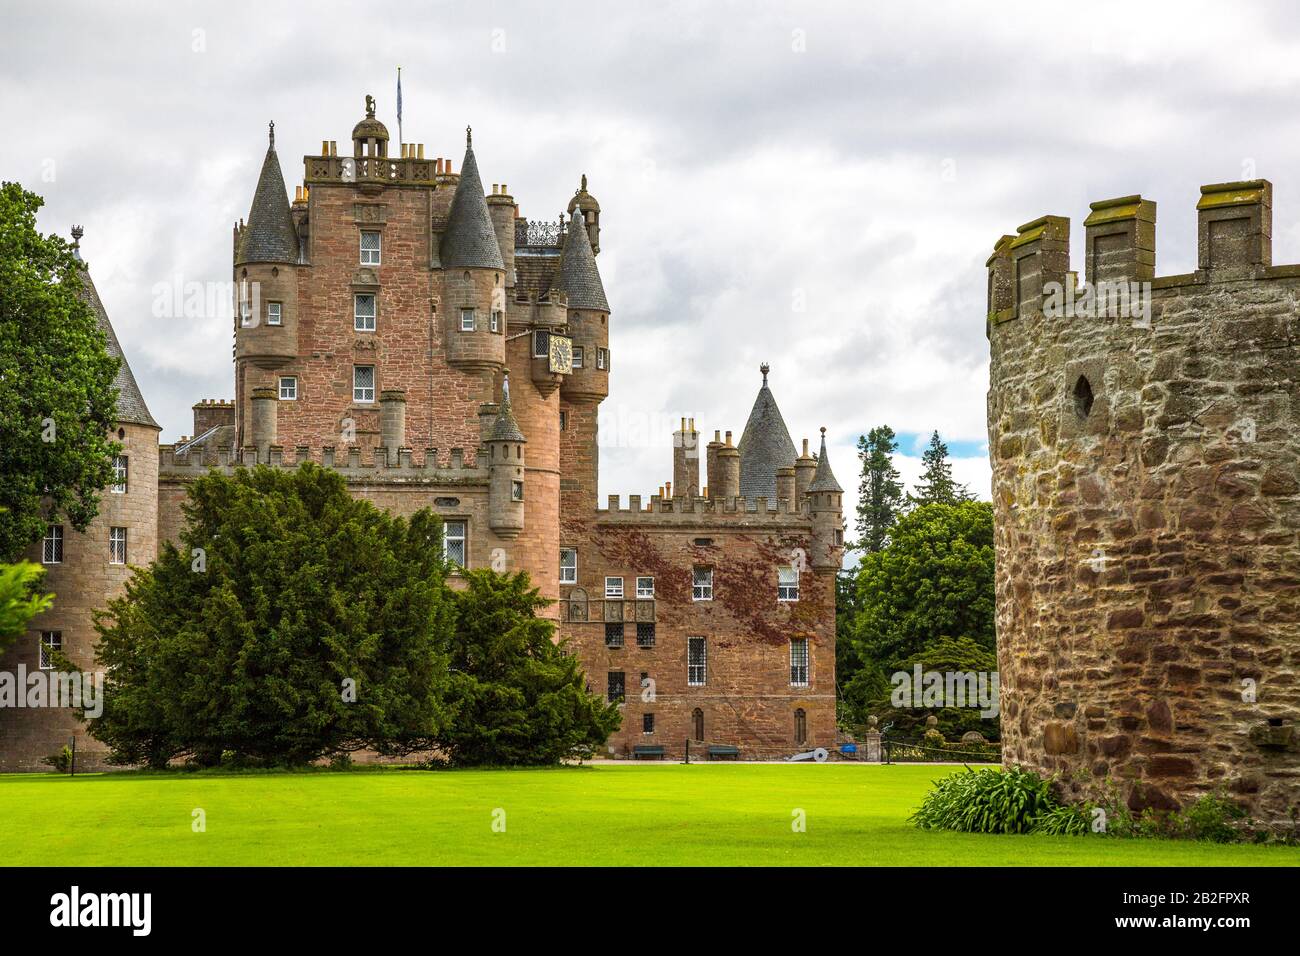 Angus, Scotland, Fife area, the Glamis castle, childhood home of the Queen Elizabeth. Stock Photo